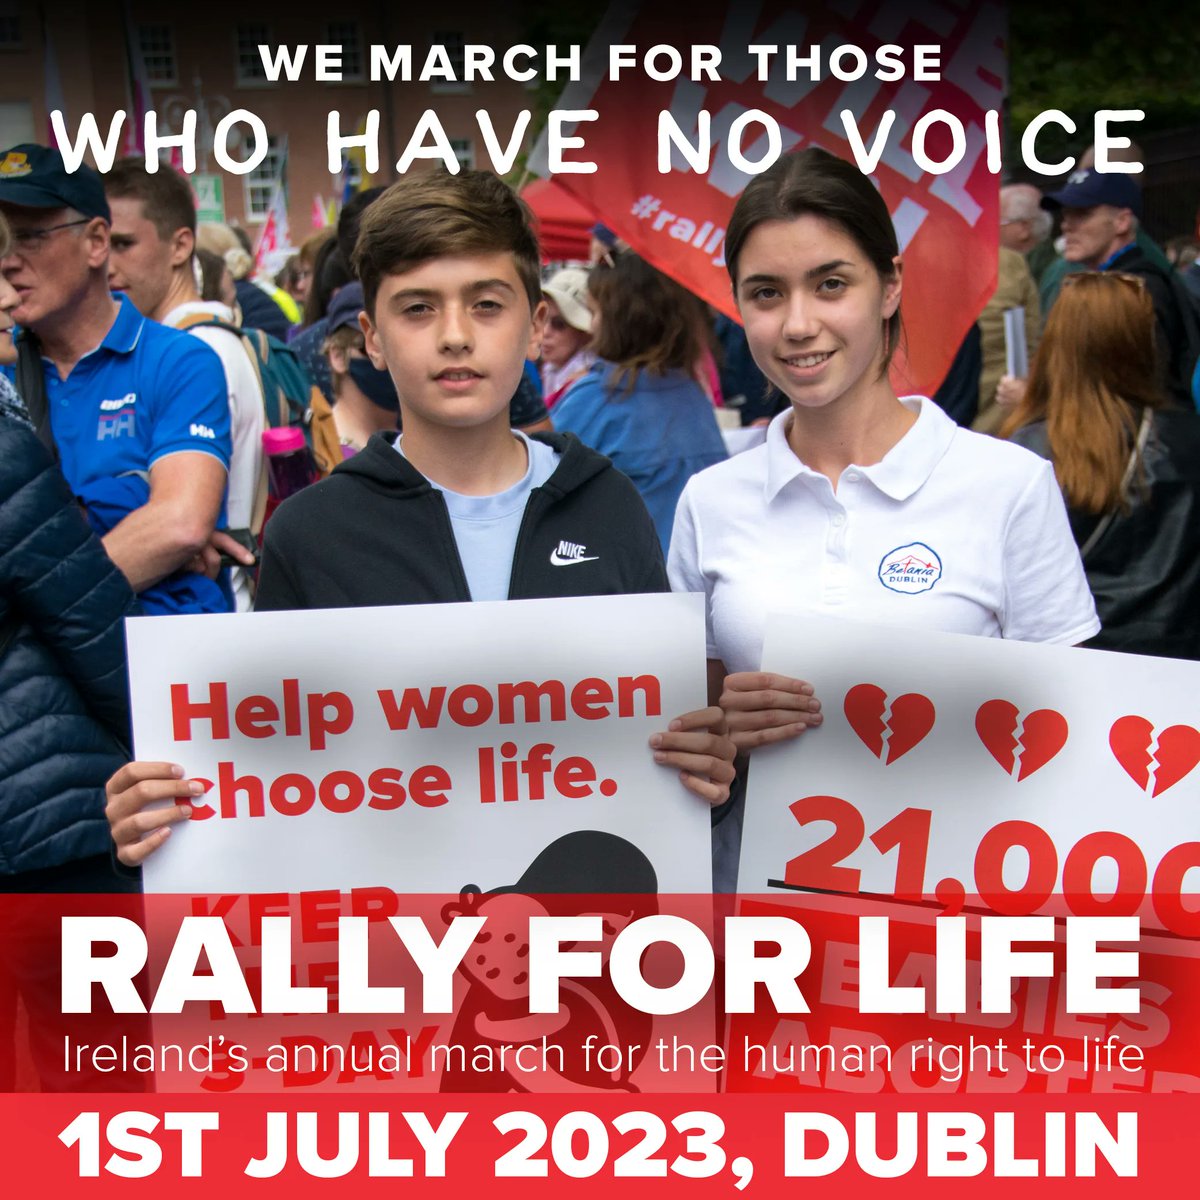 THIS SATURDAY we will be marching for those who have no voice! The Rally for Life will be gathering in Parnell Sq at 1pm. Will you join us? 

See more here: buff.ly/3kxksfa

#StopAbortingOurFuture #RallyforLife #WhyWeMarch